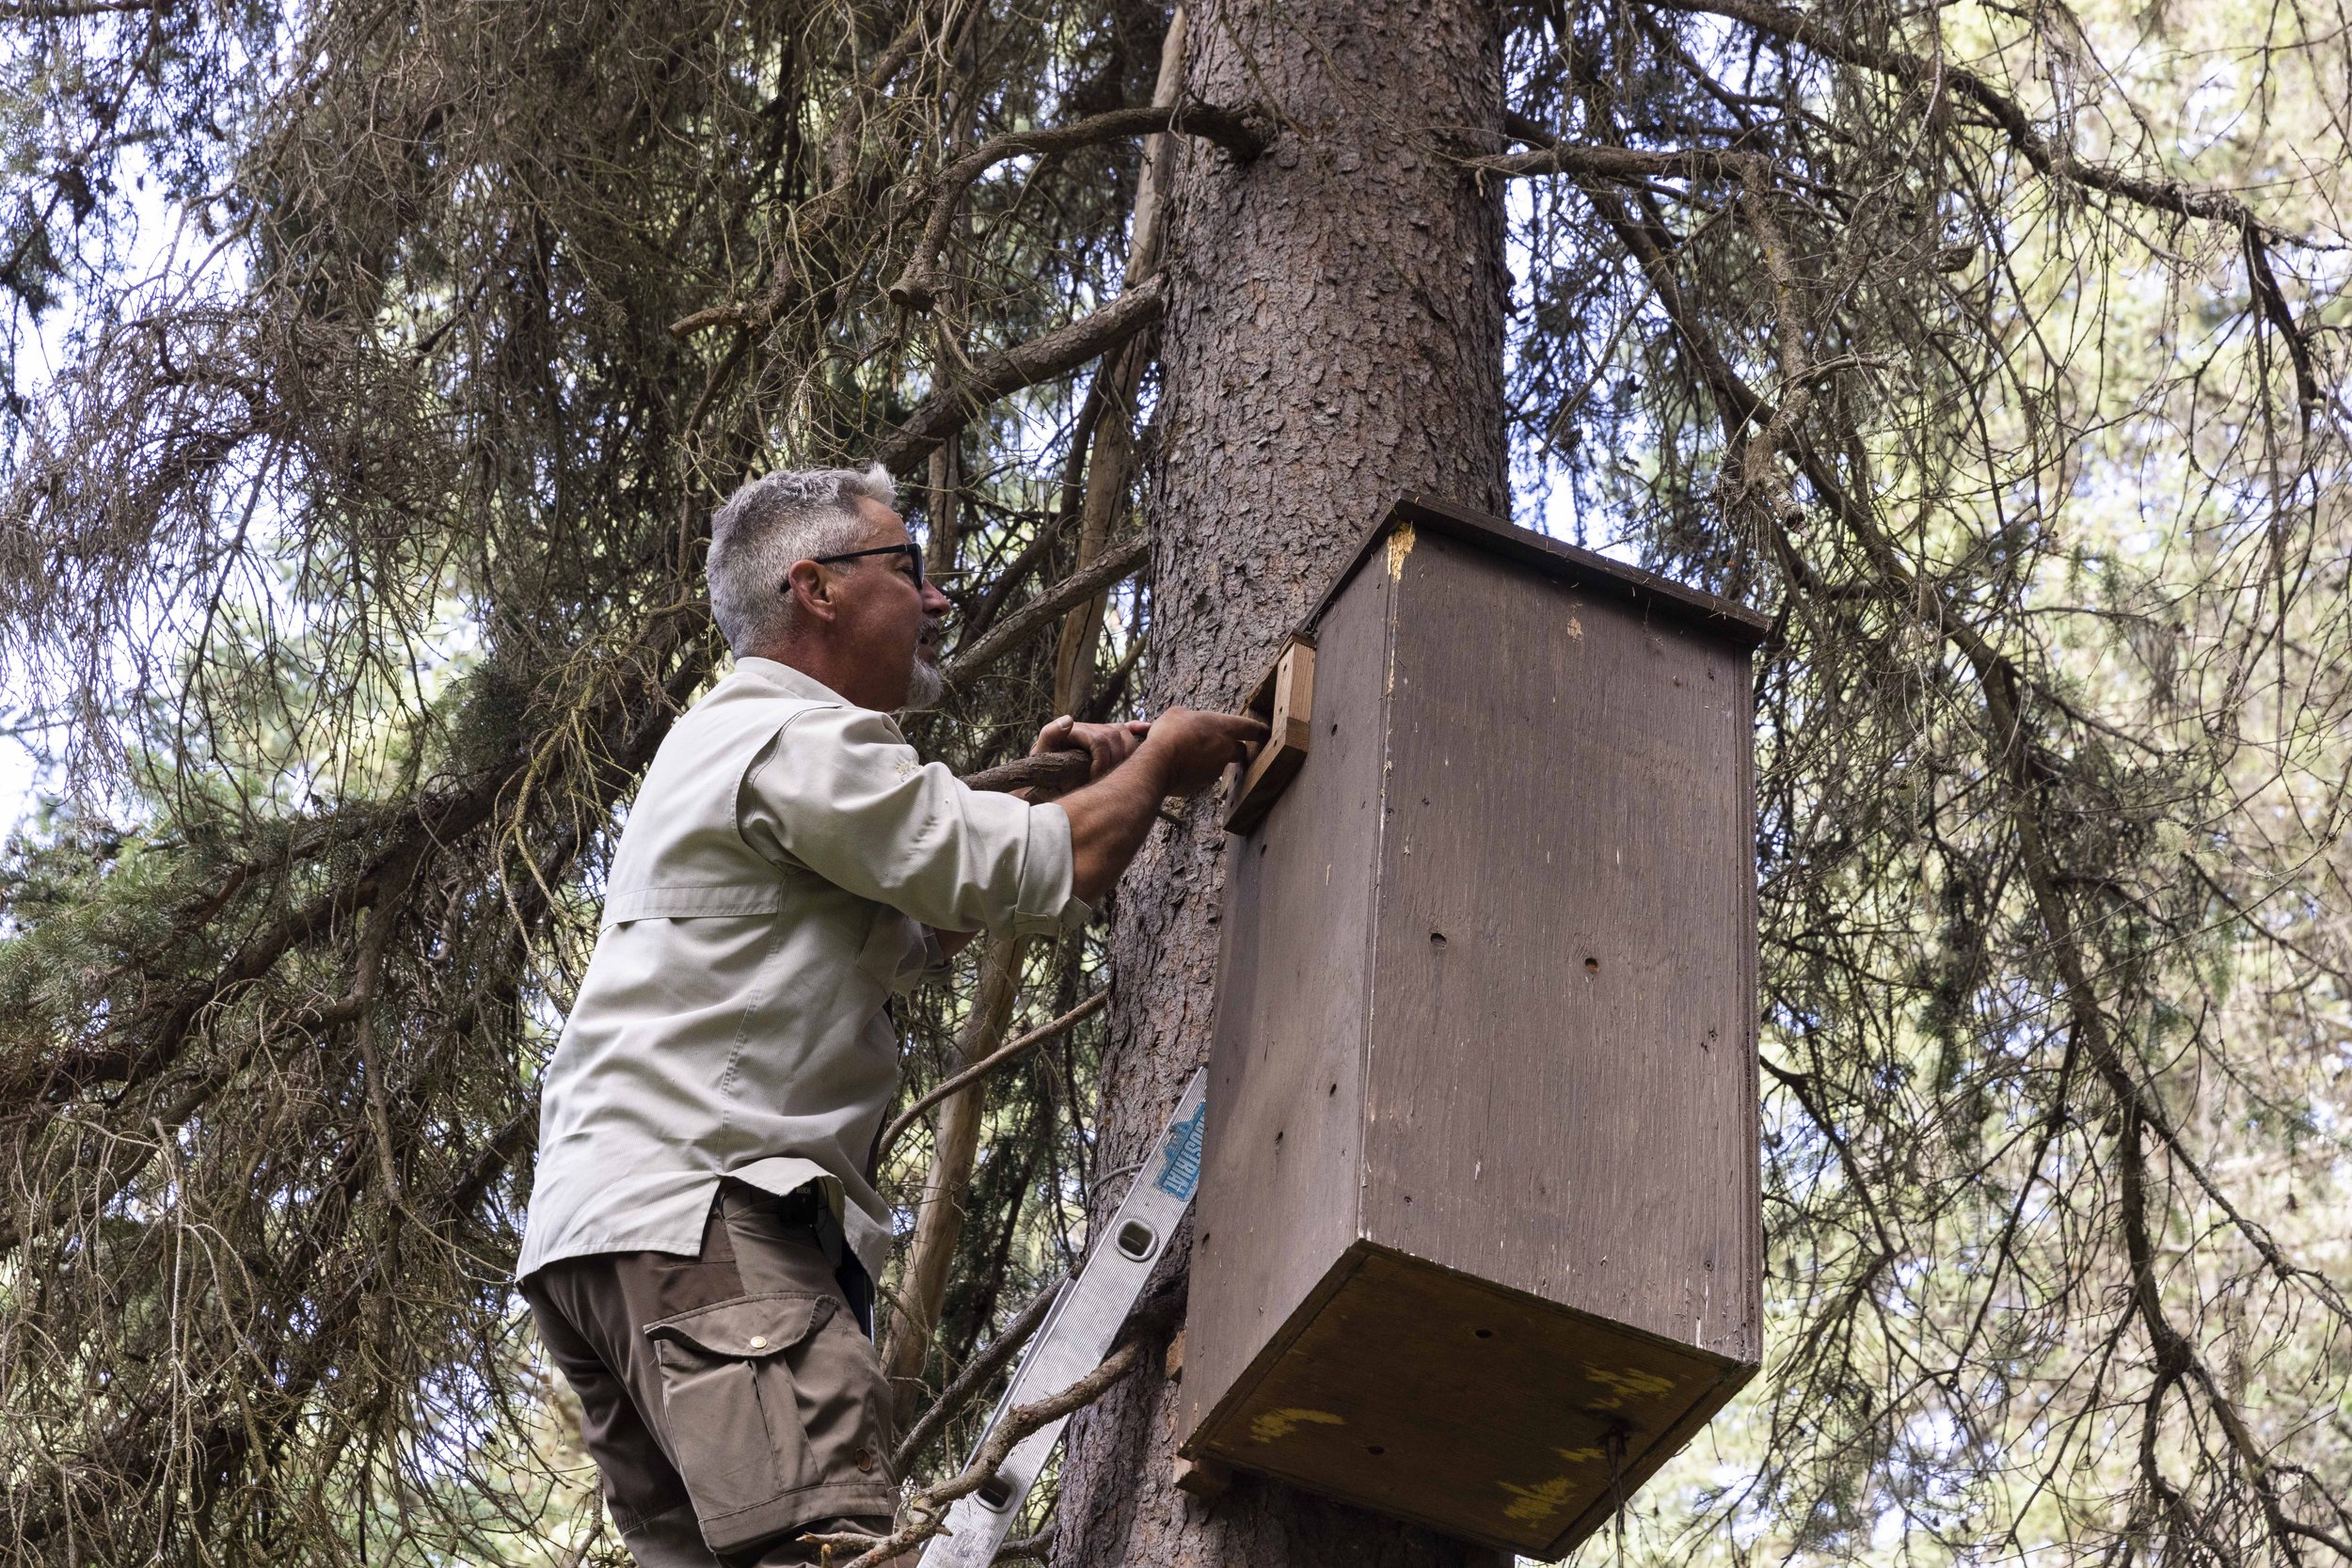  Fisher researcher Larry Davis inspects an artificial den box for fisher he set up in an attempt to deal with the lack of old trees large enough to have natural cavities for fishers to use. Fisher are the largest mammal in North America that requires